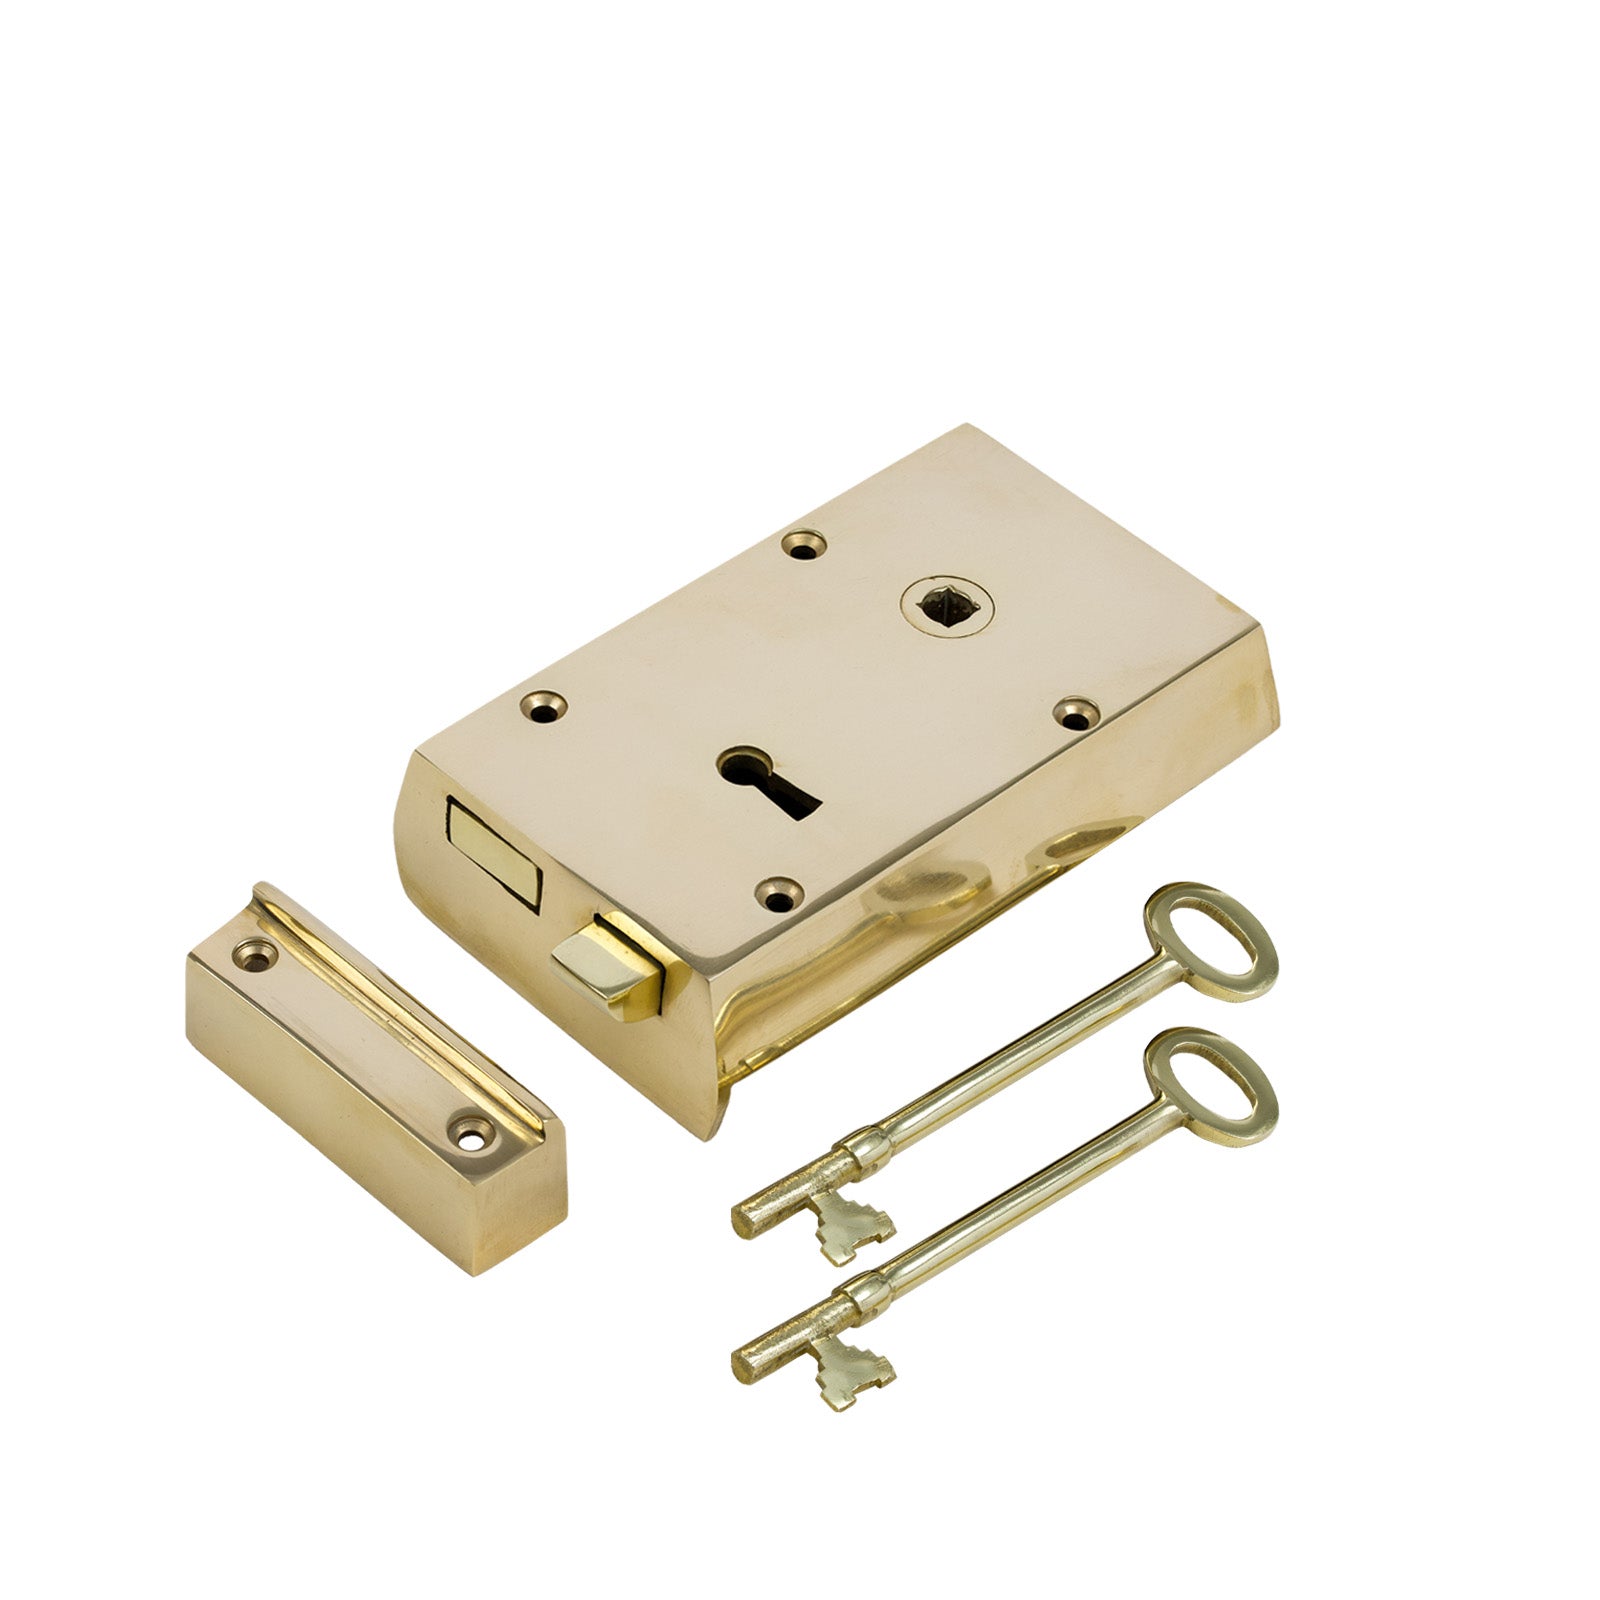 Show Small Right Handed Brass Rim Lock with two keys